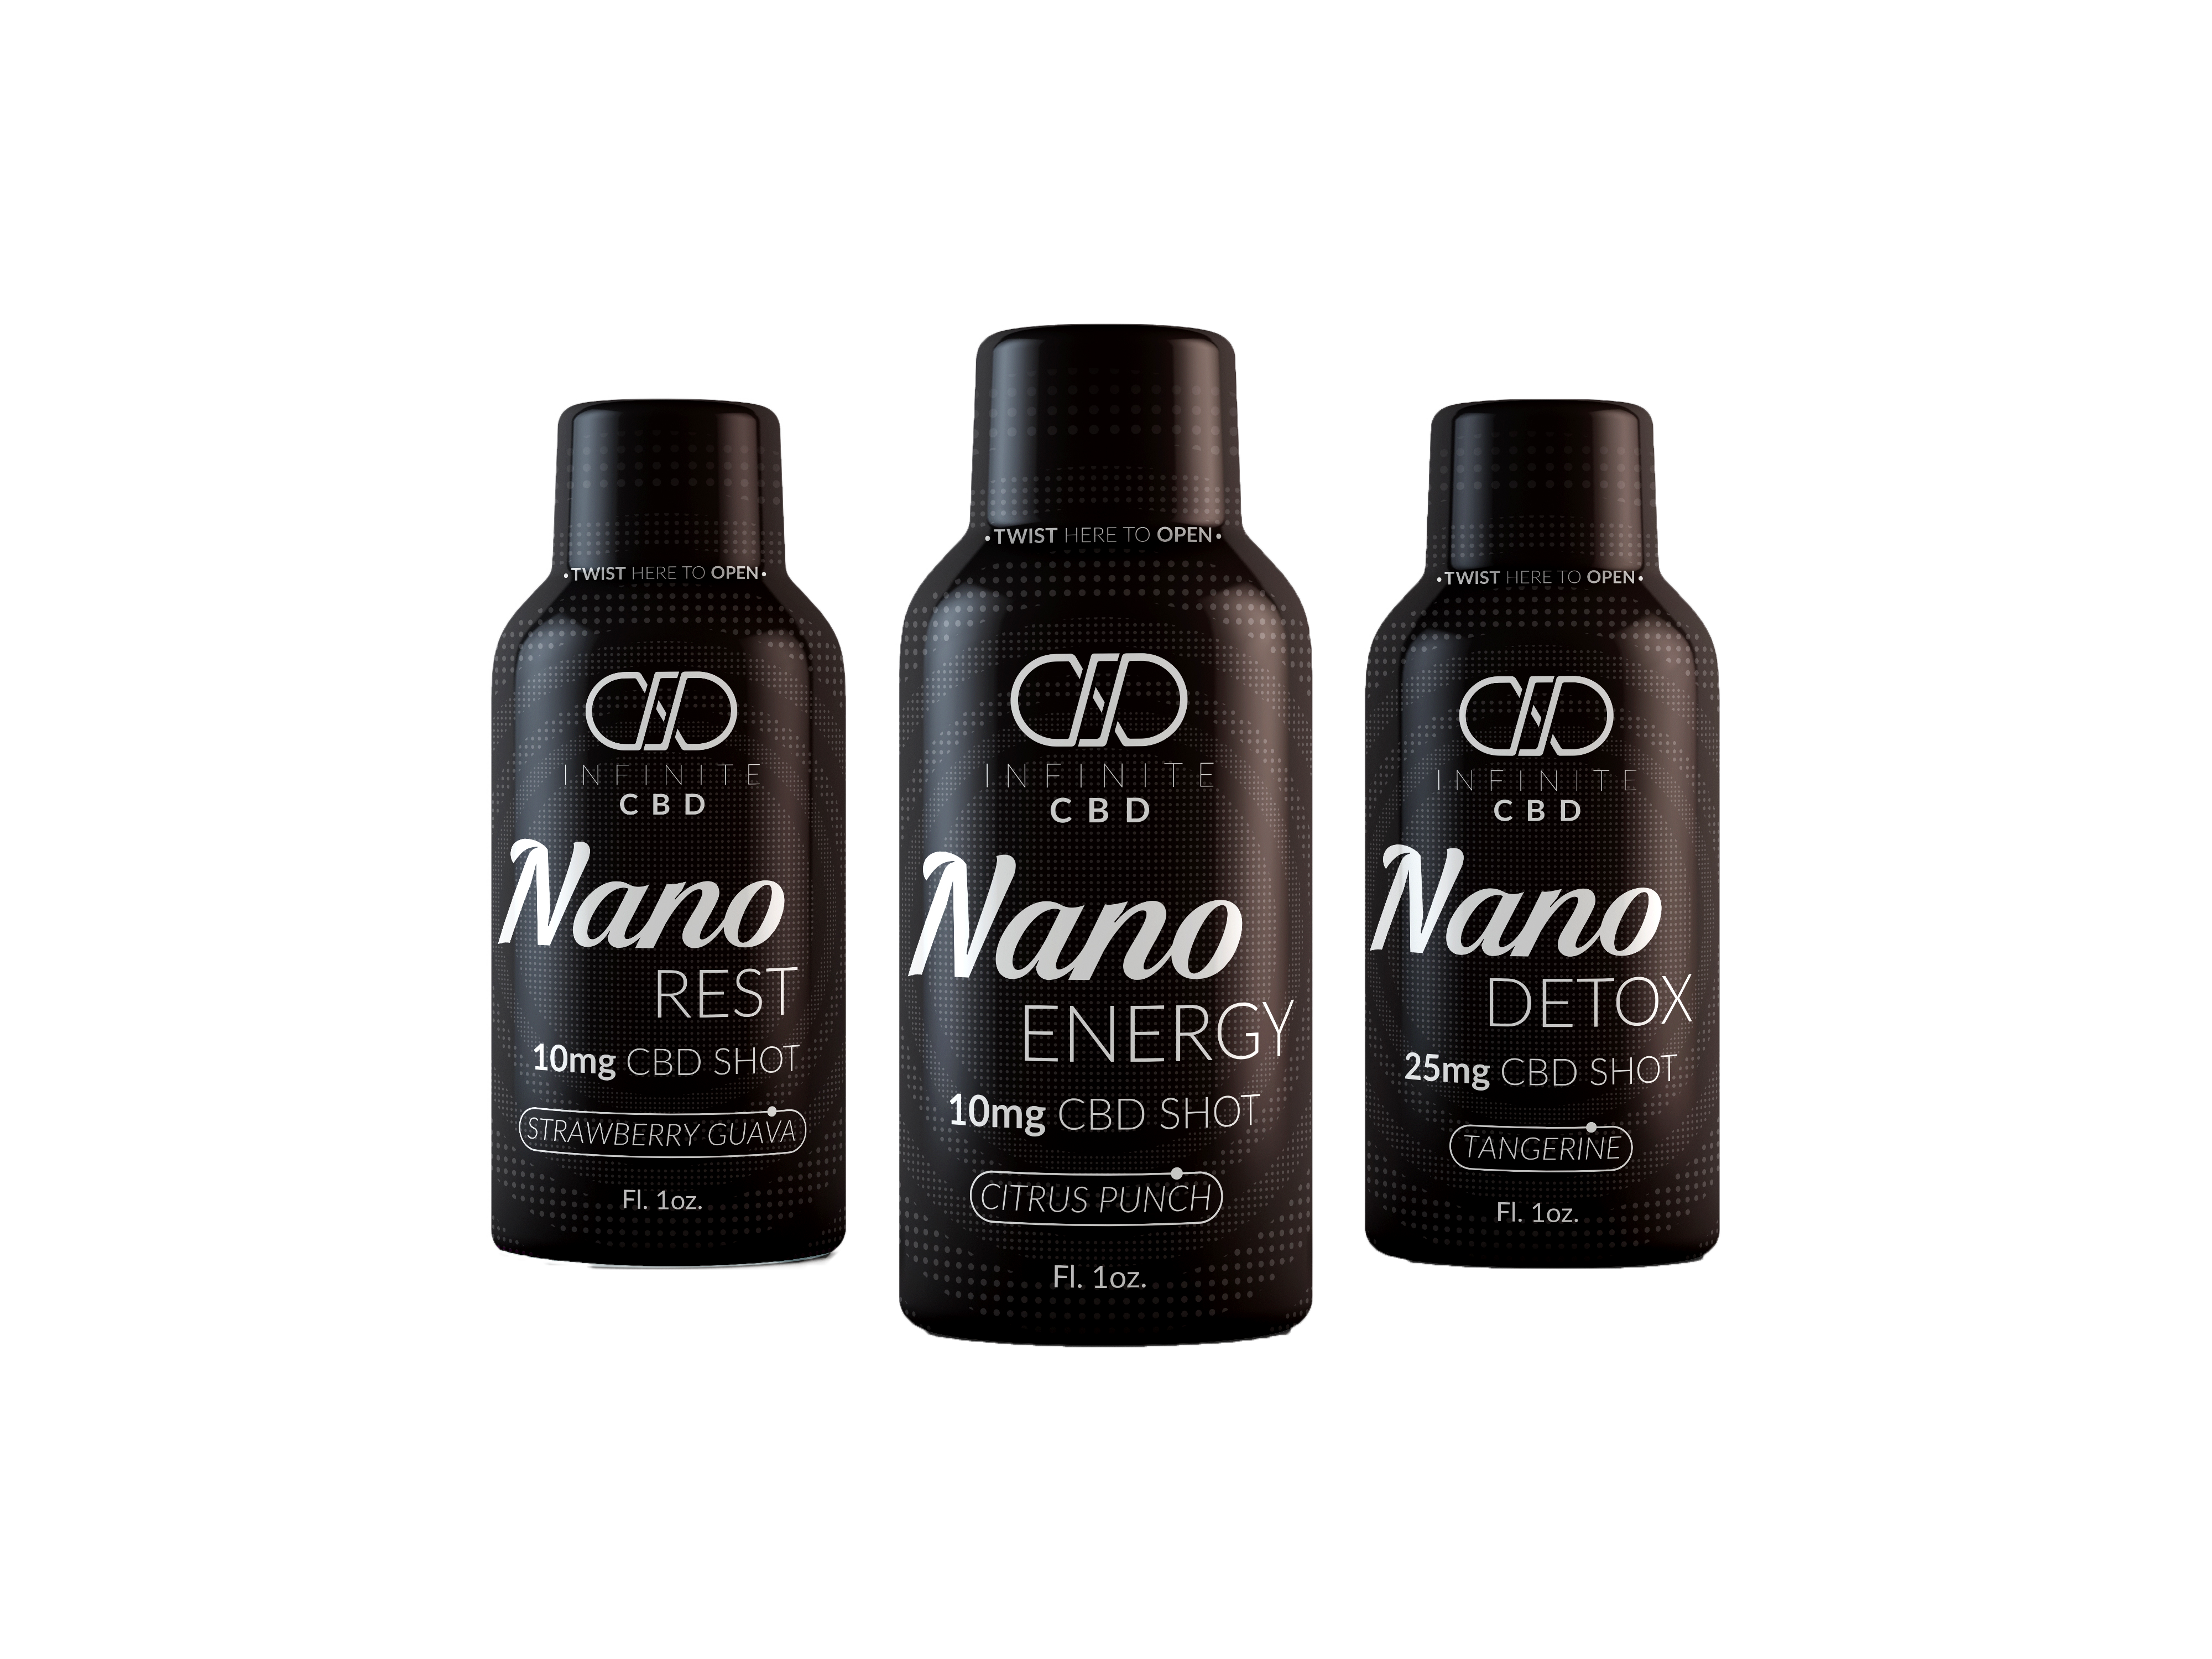 Customers can enjoy easier access to our powerful Nano CBD Shots!